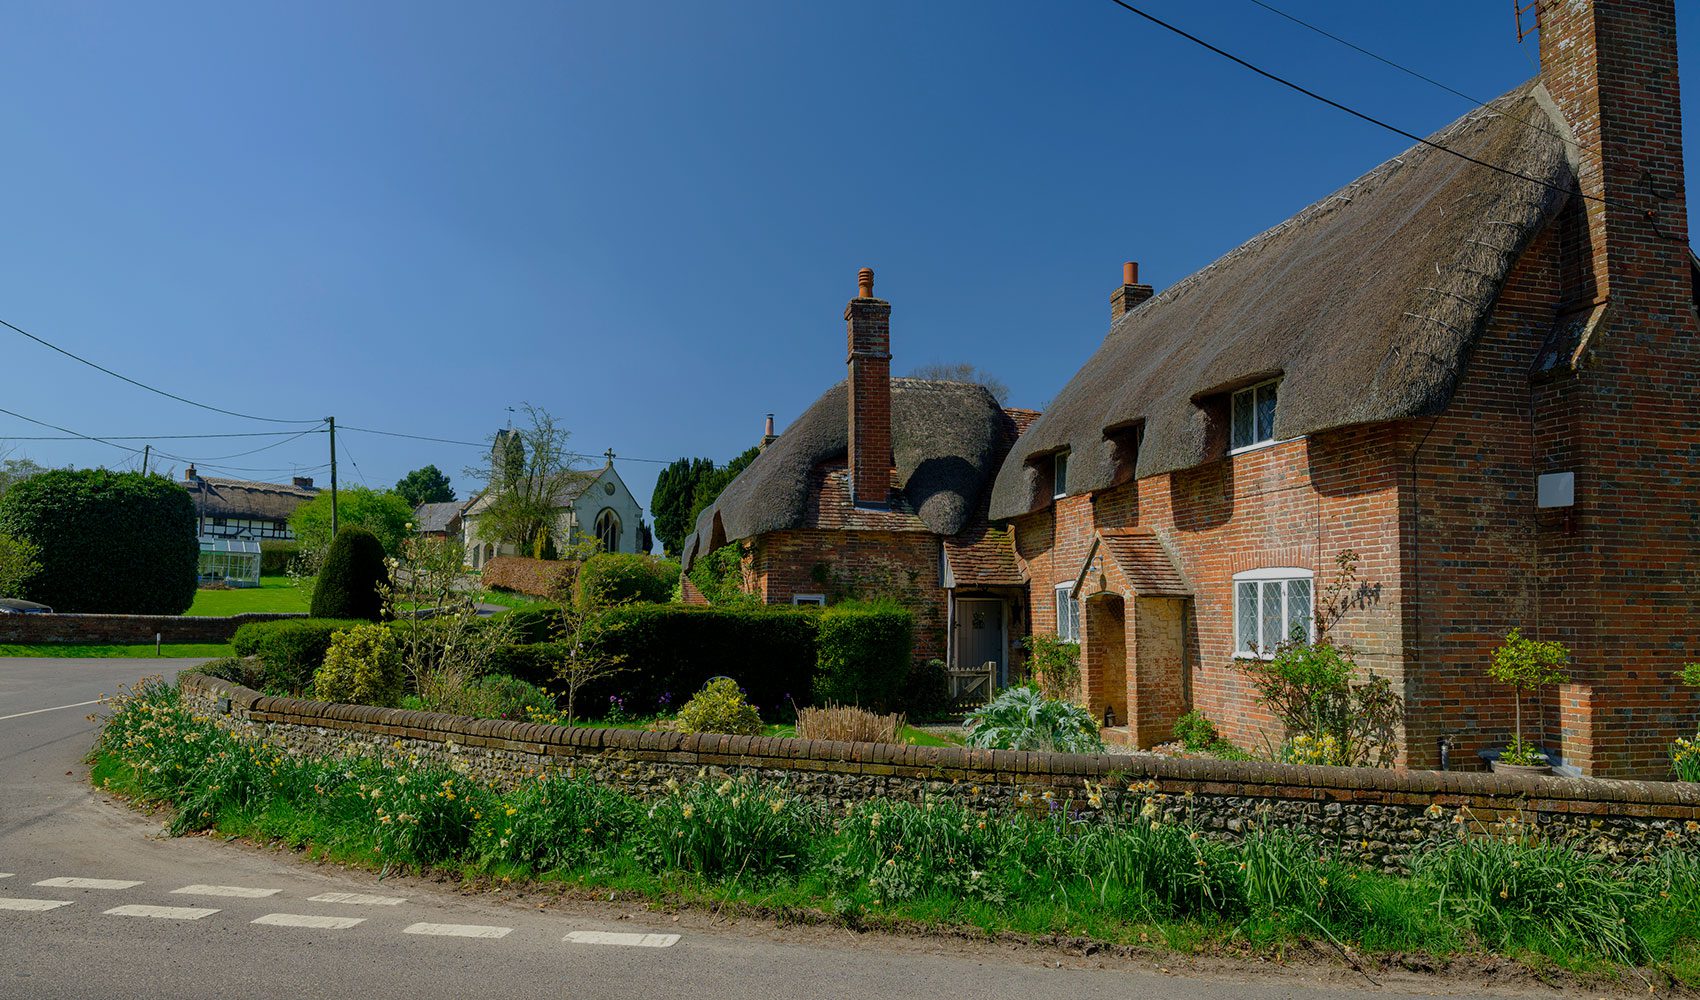 Thatched roof houses in Hampshire